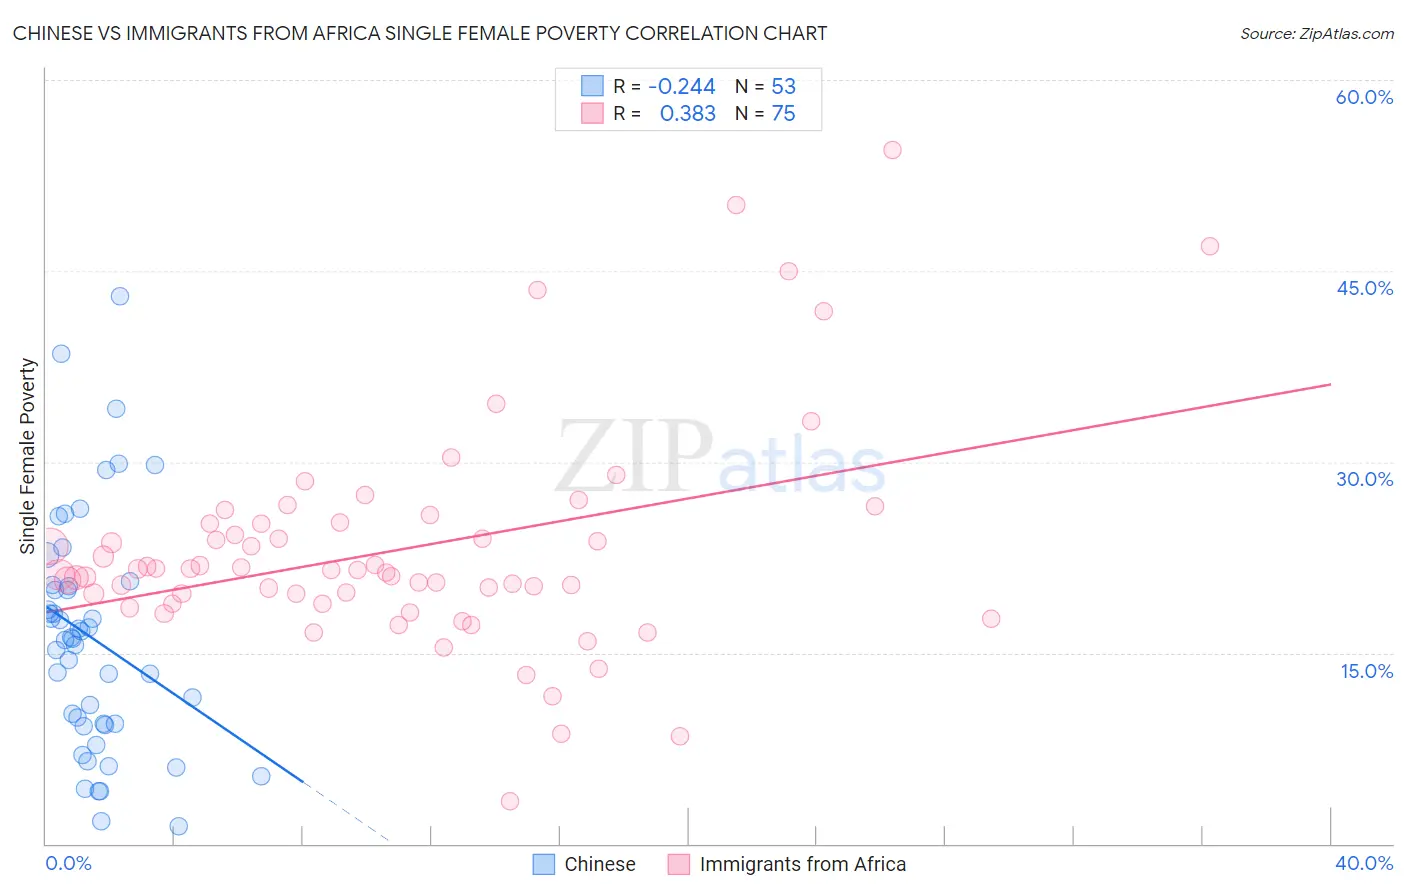 Chinese vs Immigrants from Africa Single Female Poverty